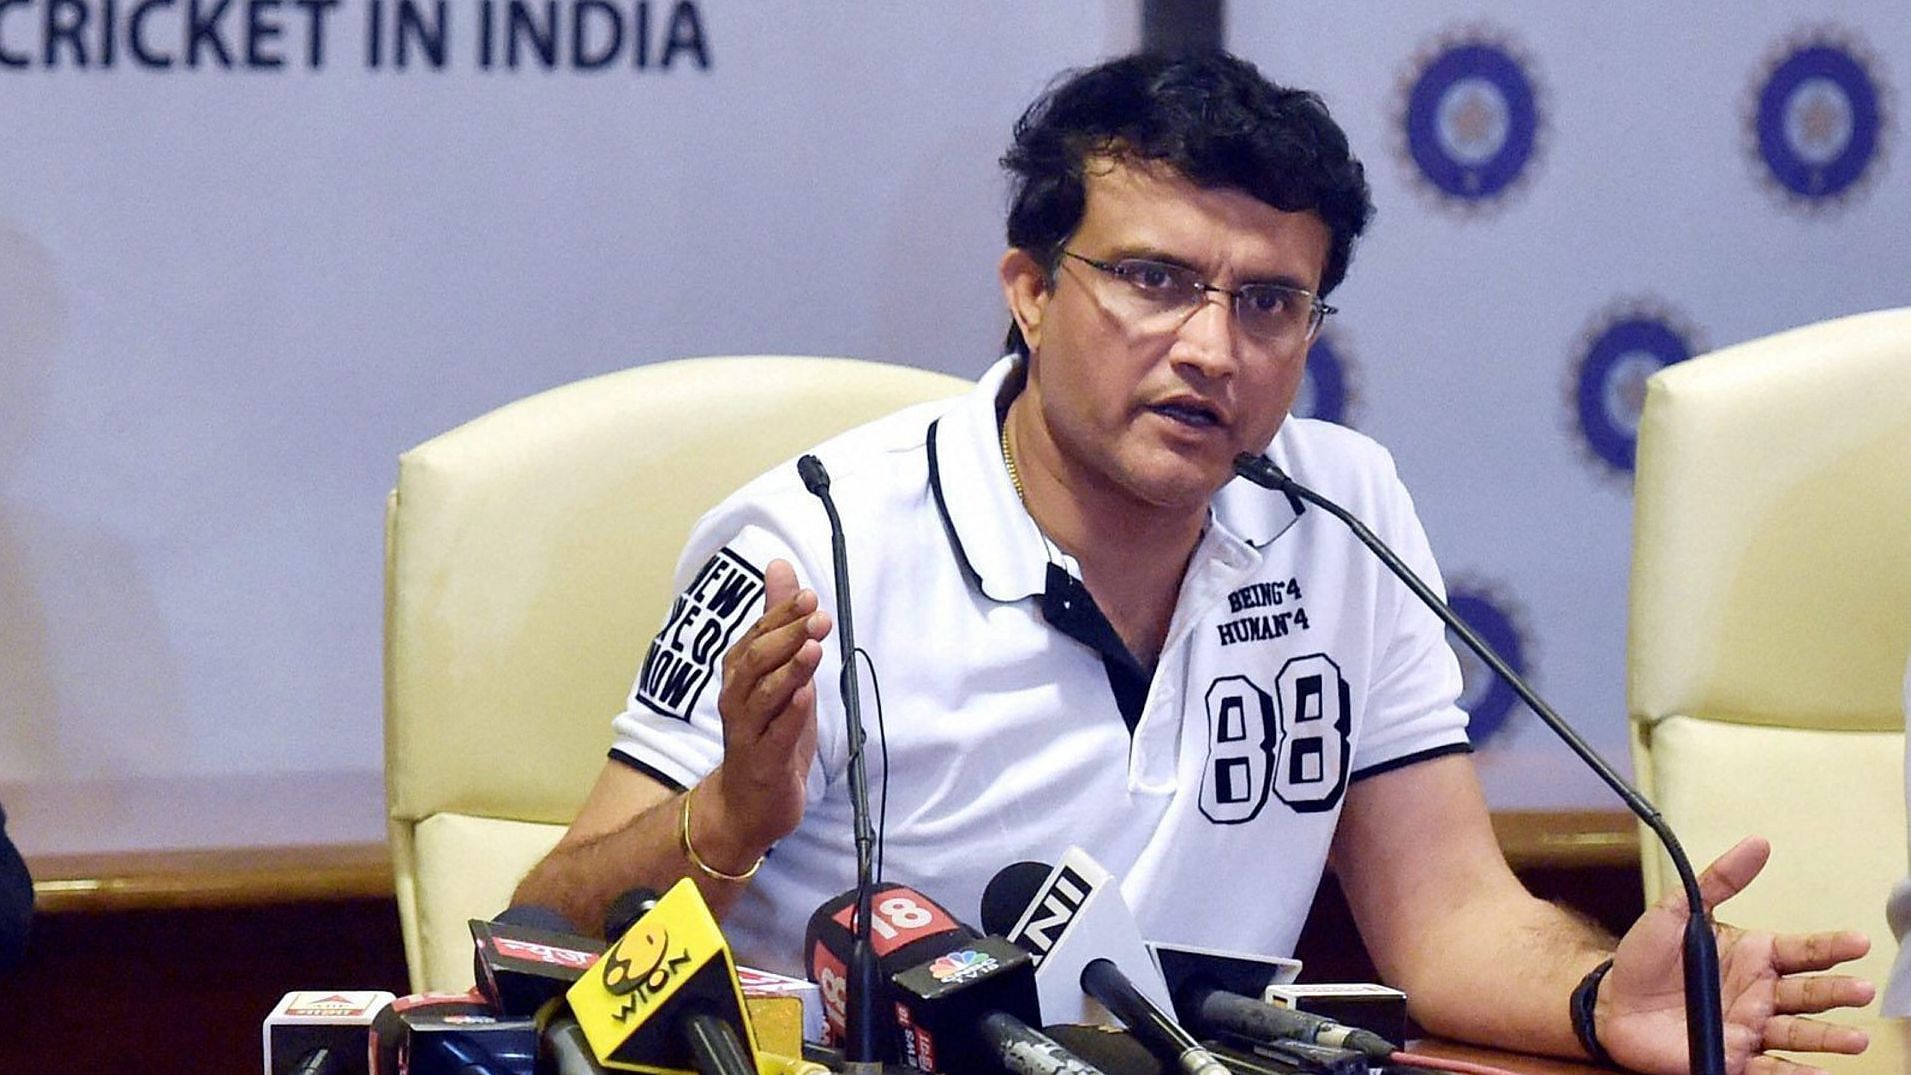 This will be Ganguly’s second term after he became the President in 2015, following Jagmohan Dalmiya’s demise.